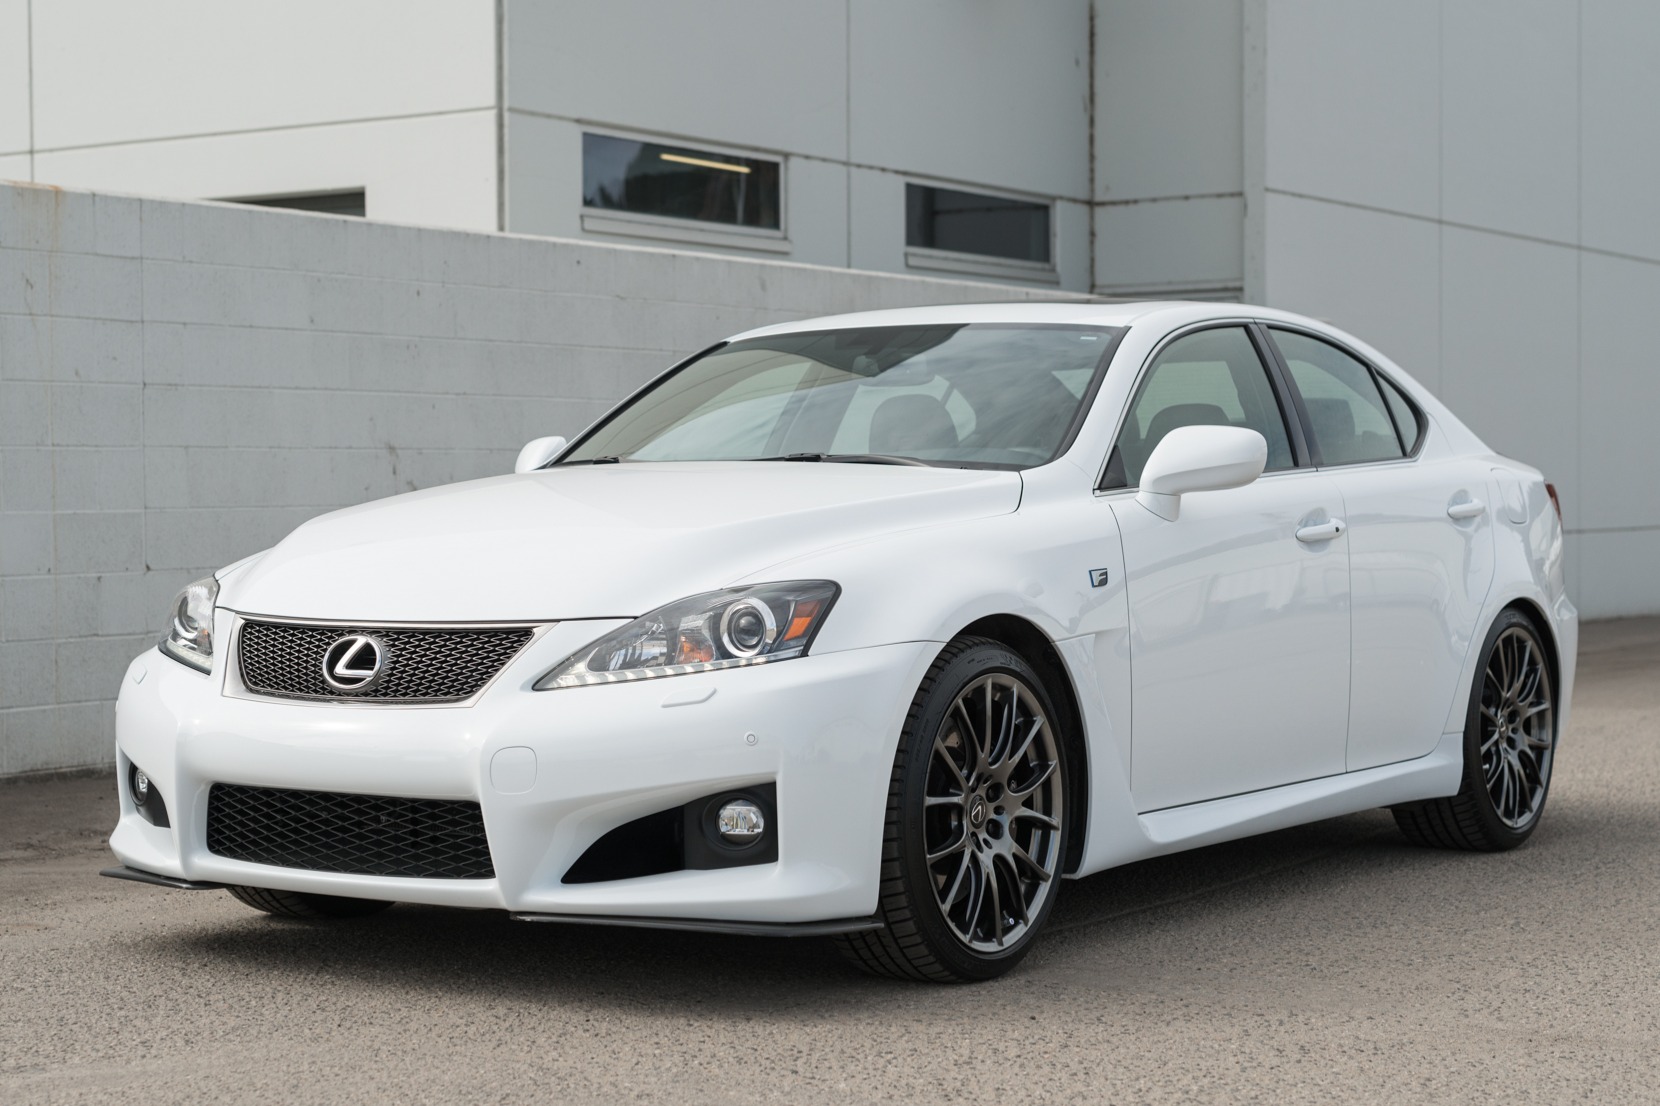 7k-Kilometer 2014 Lexus IS-F for sale on BaT Auctions - closed on May 20,  2021 (Lot #48,249) | Bring a Trailer